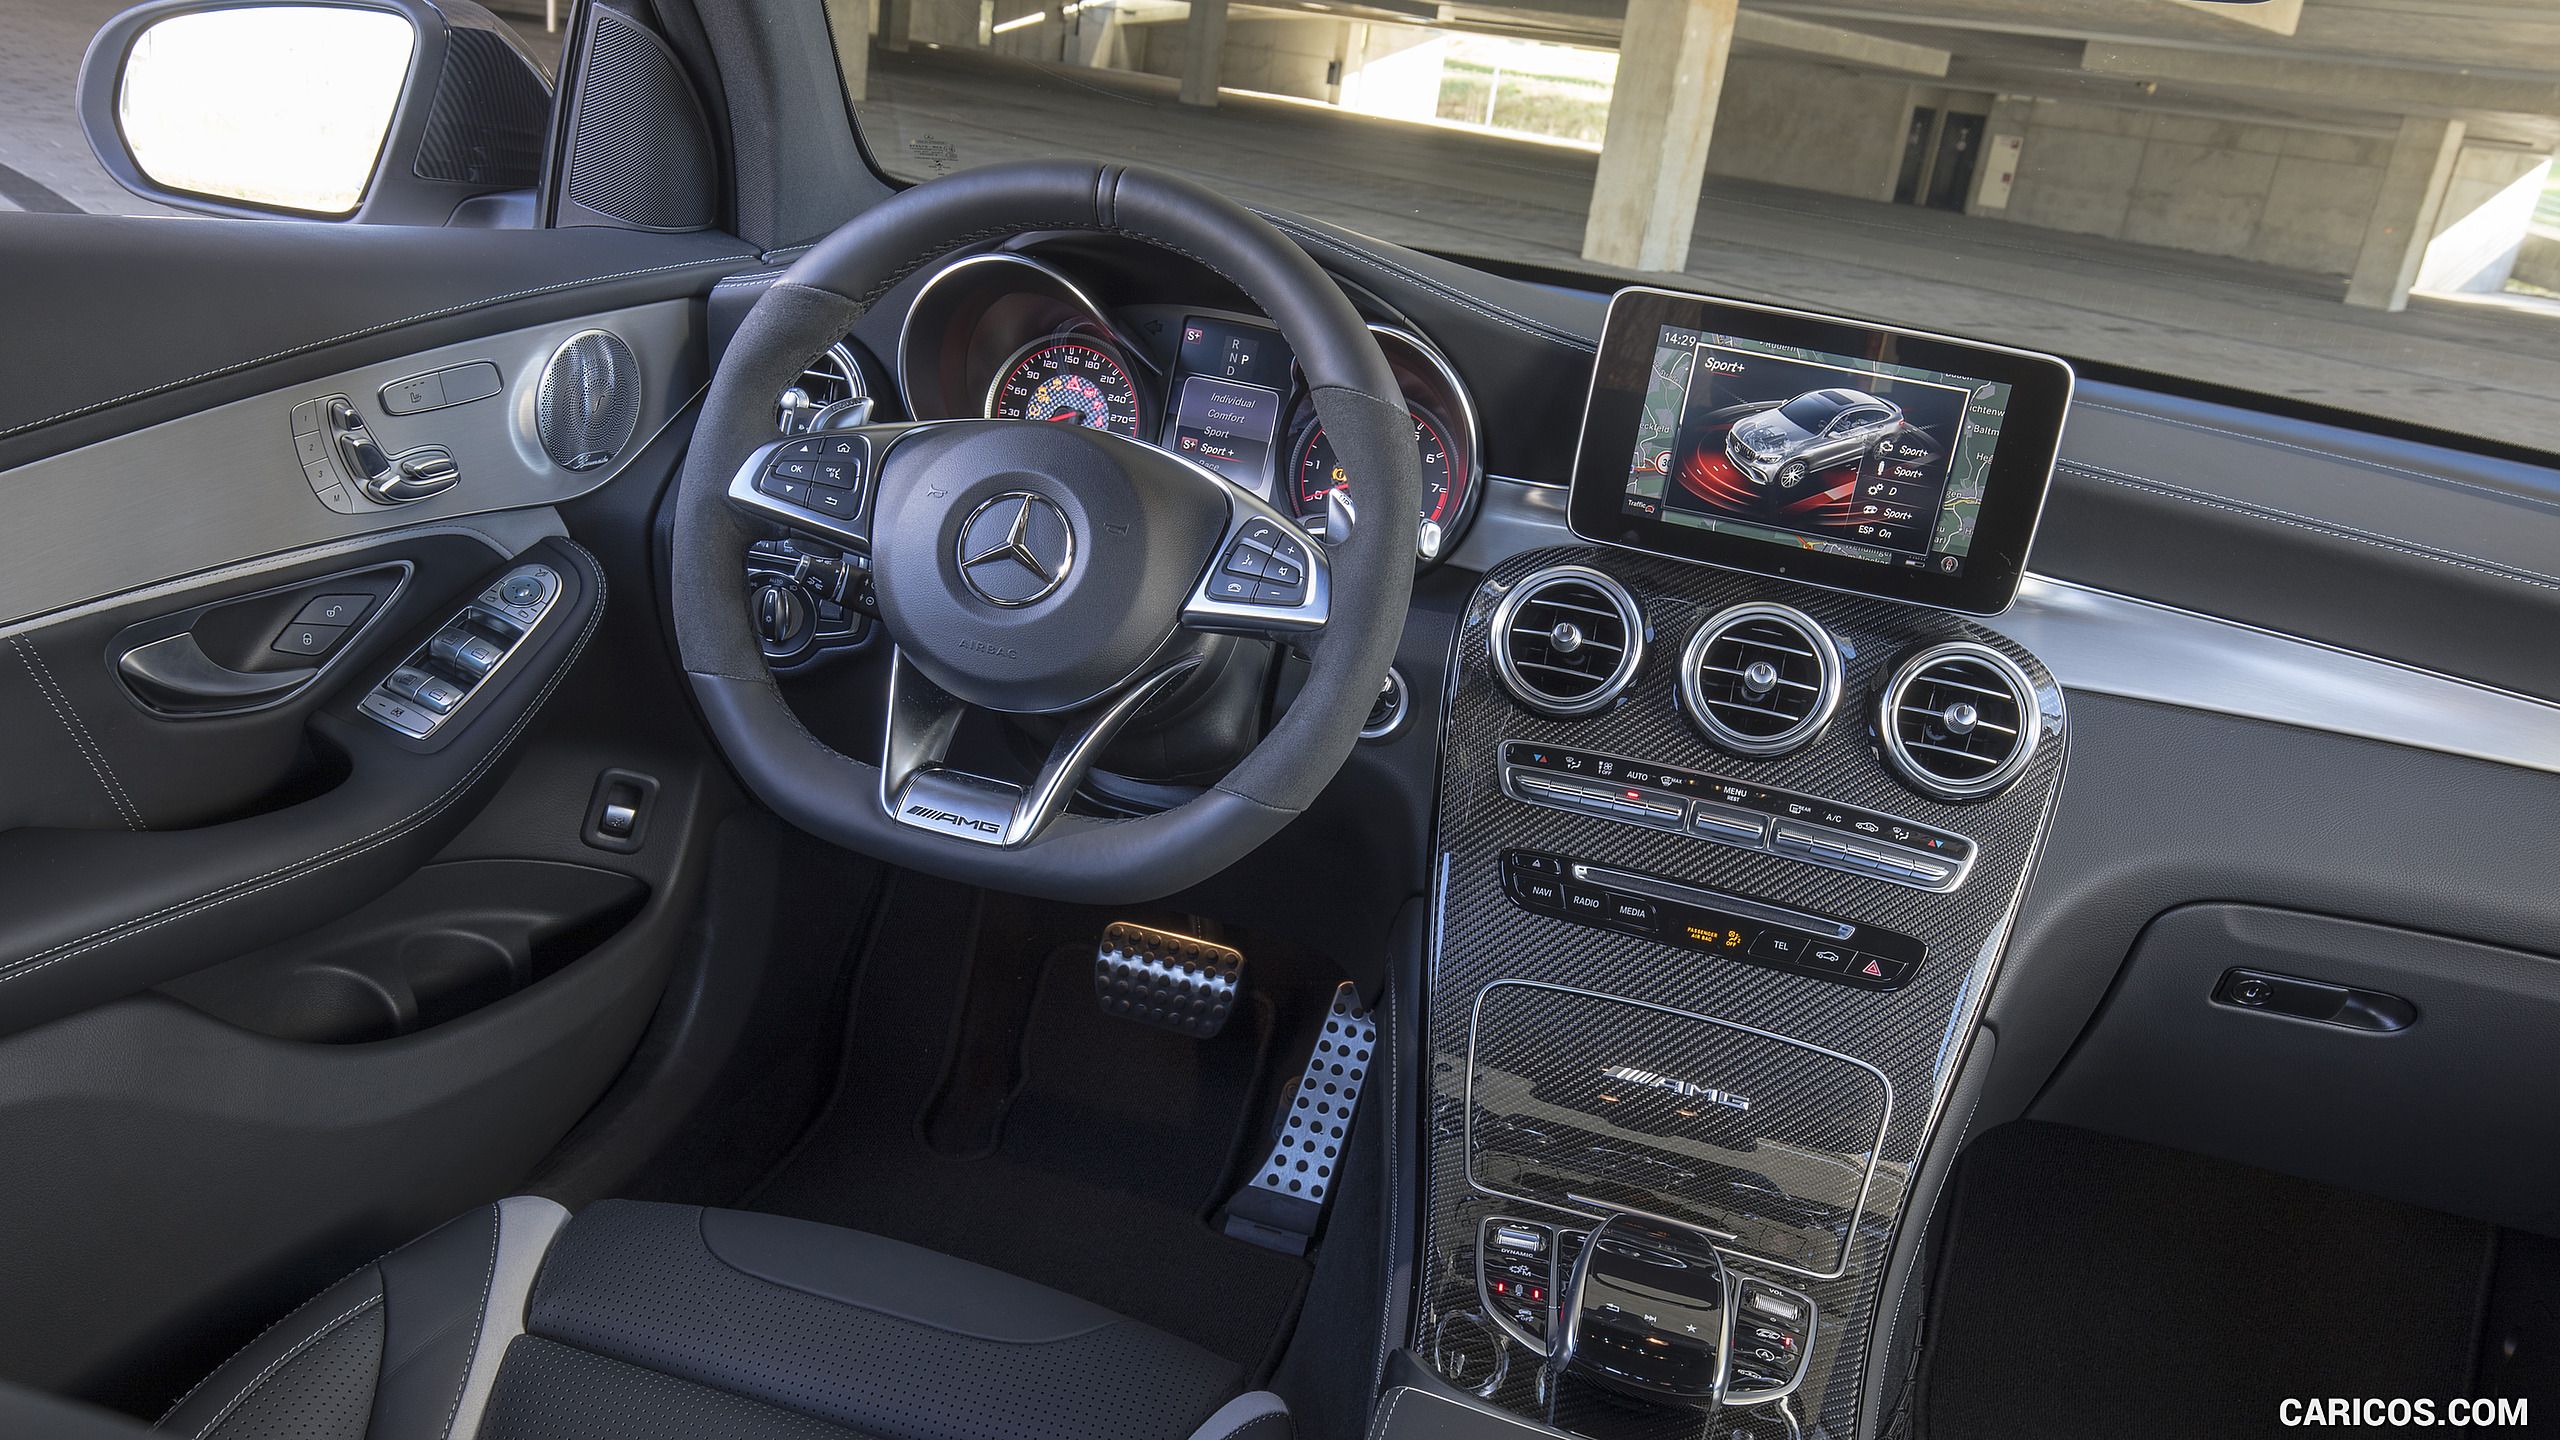 2018 Mercedes-AMG GLC 63 S Coupe - Interior, Cockpit, #63 of 75